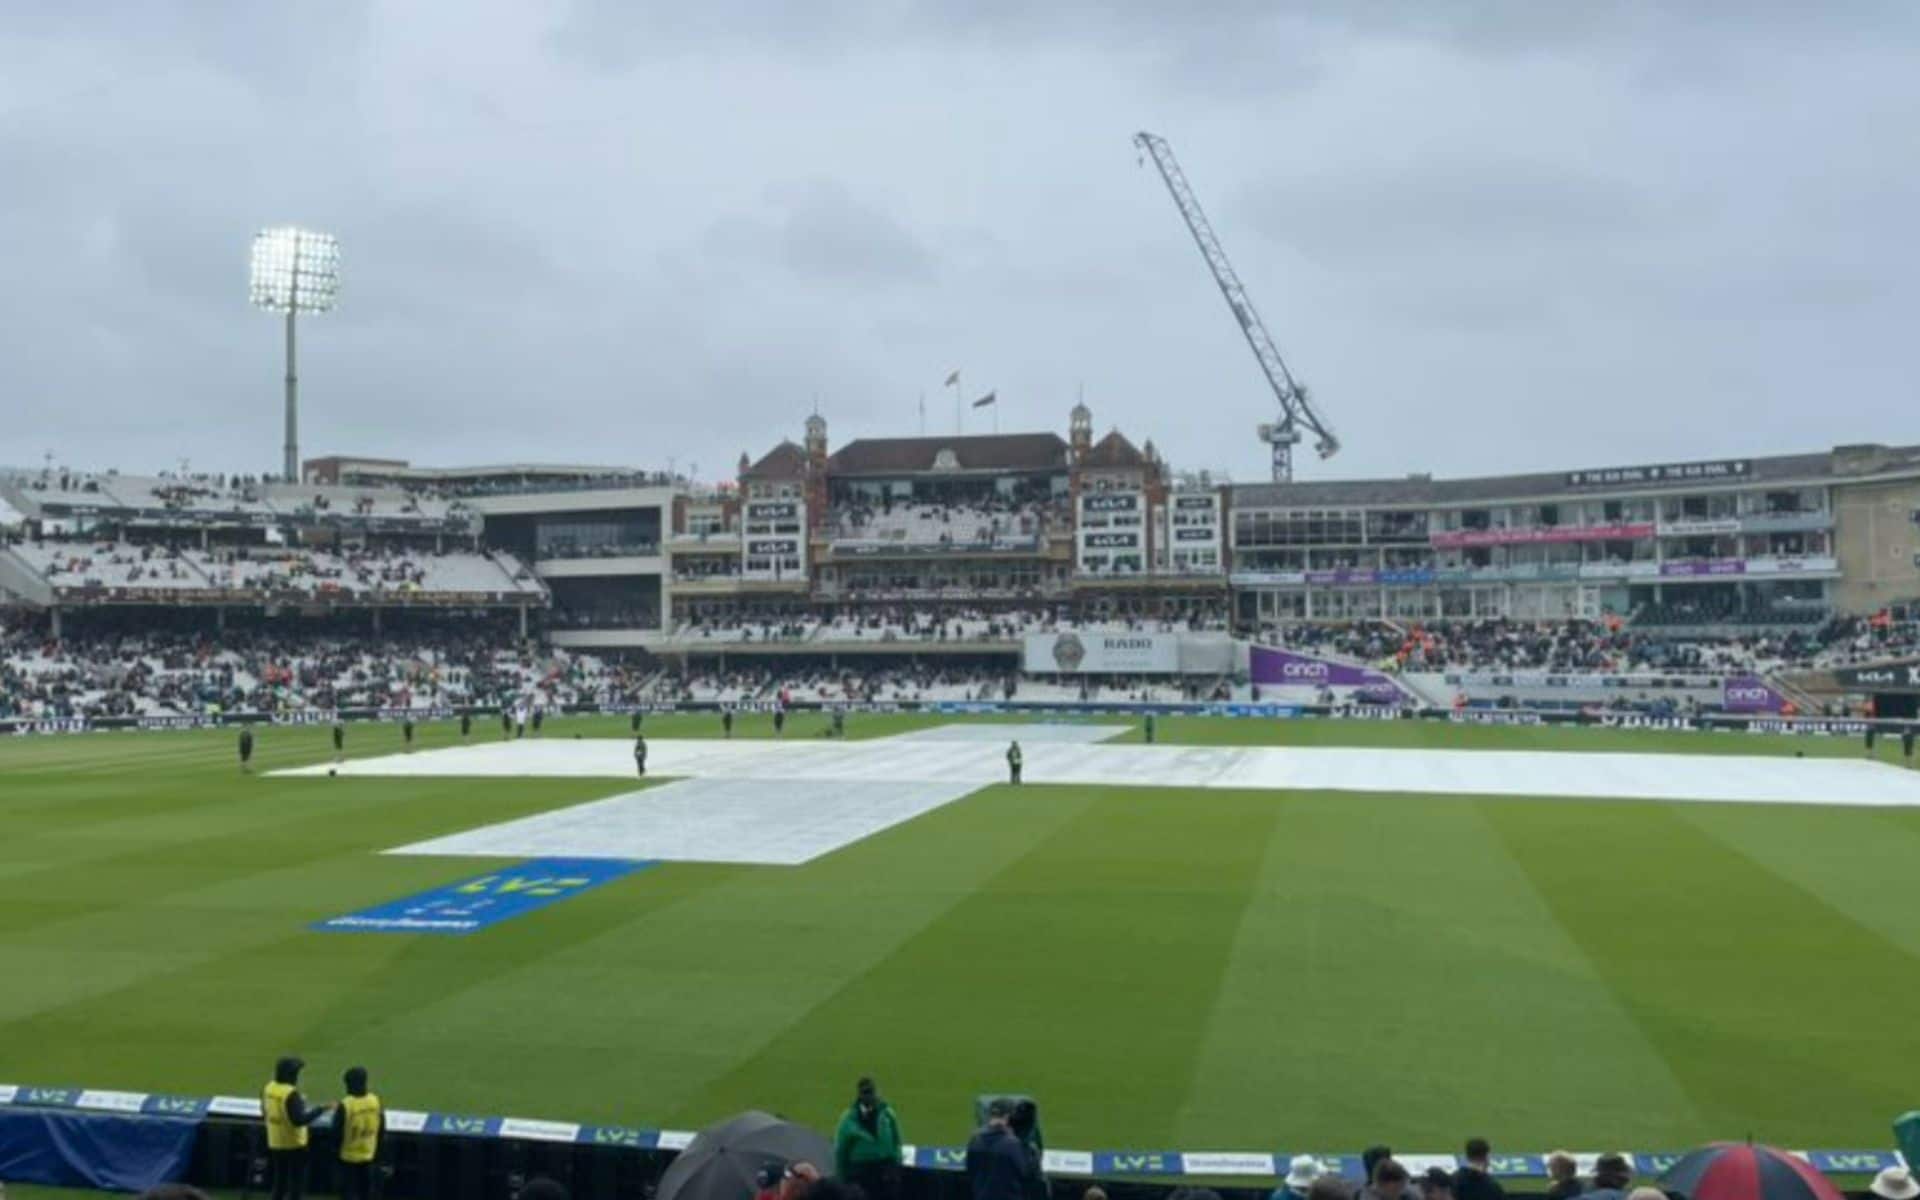 Kennington Oval London Pitch Report For PAK Vs ENG 4th T20I